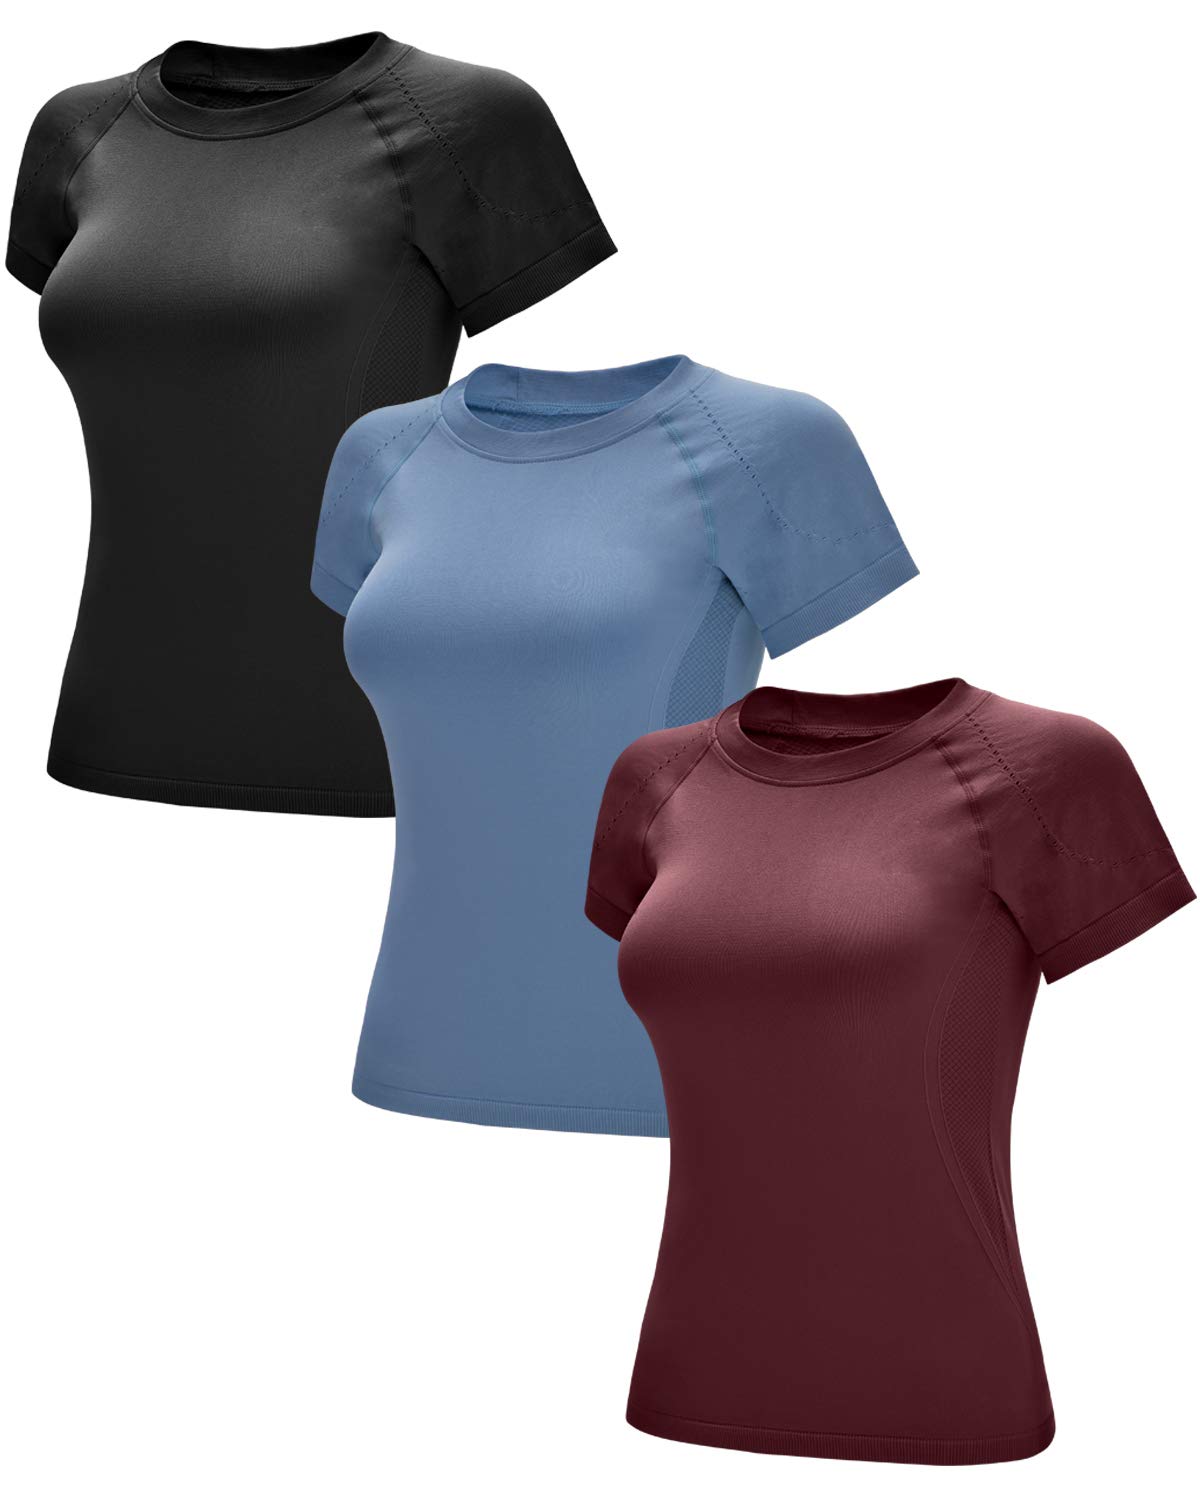 RUNNING GIRL Seamless Workout Shirts for Women Dry-Fit Short Sleeve  T-Shirts Crew Neck Stretch Yoga Tops Athletic Shirts